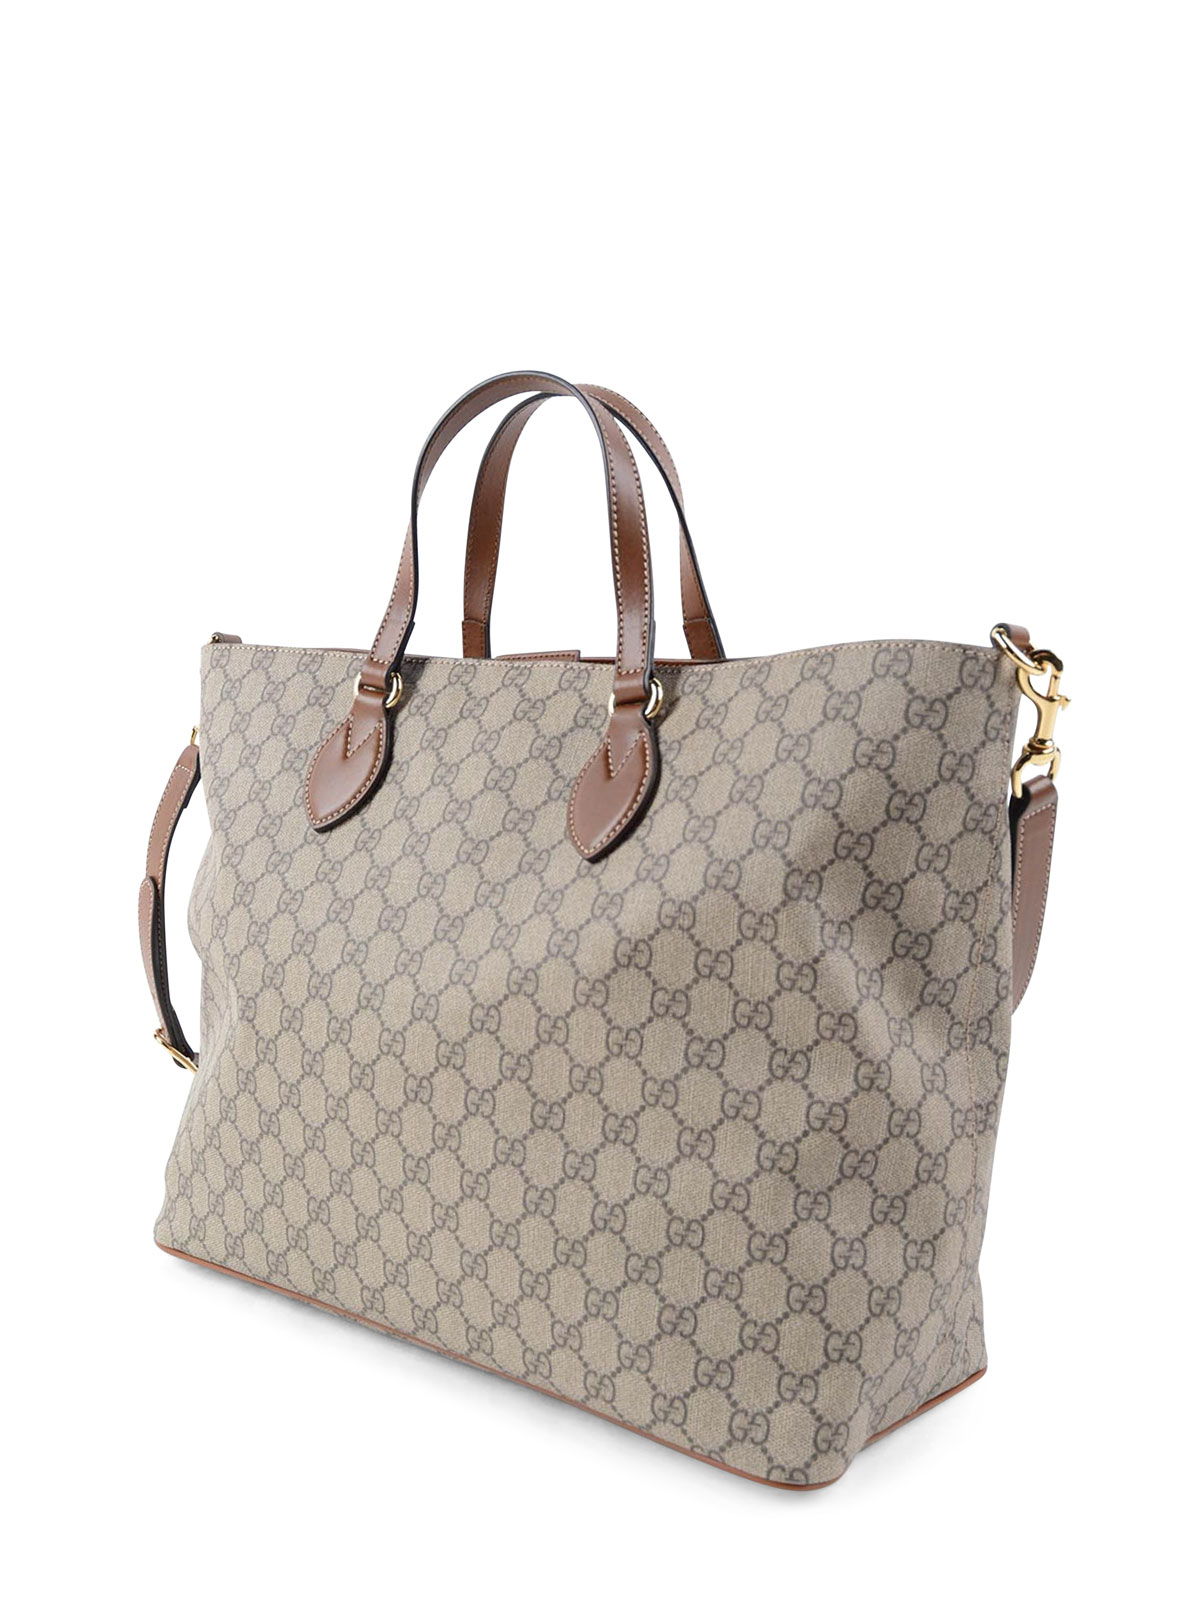 GG Supreme canvas tote bag by Gucci - totes bags | Shop online at wcy.wat.edu.pl